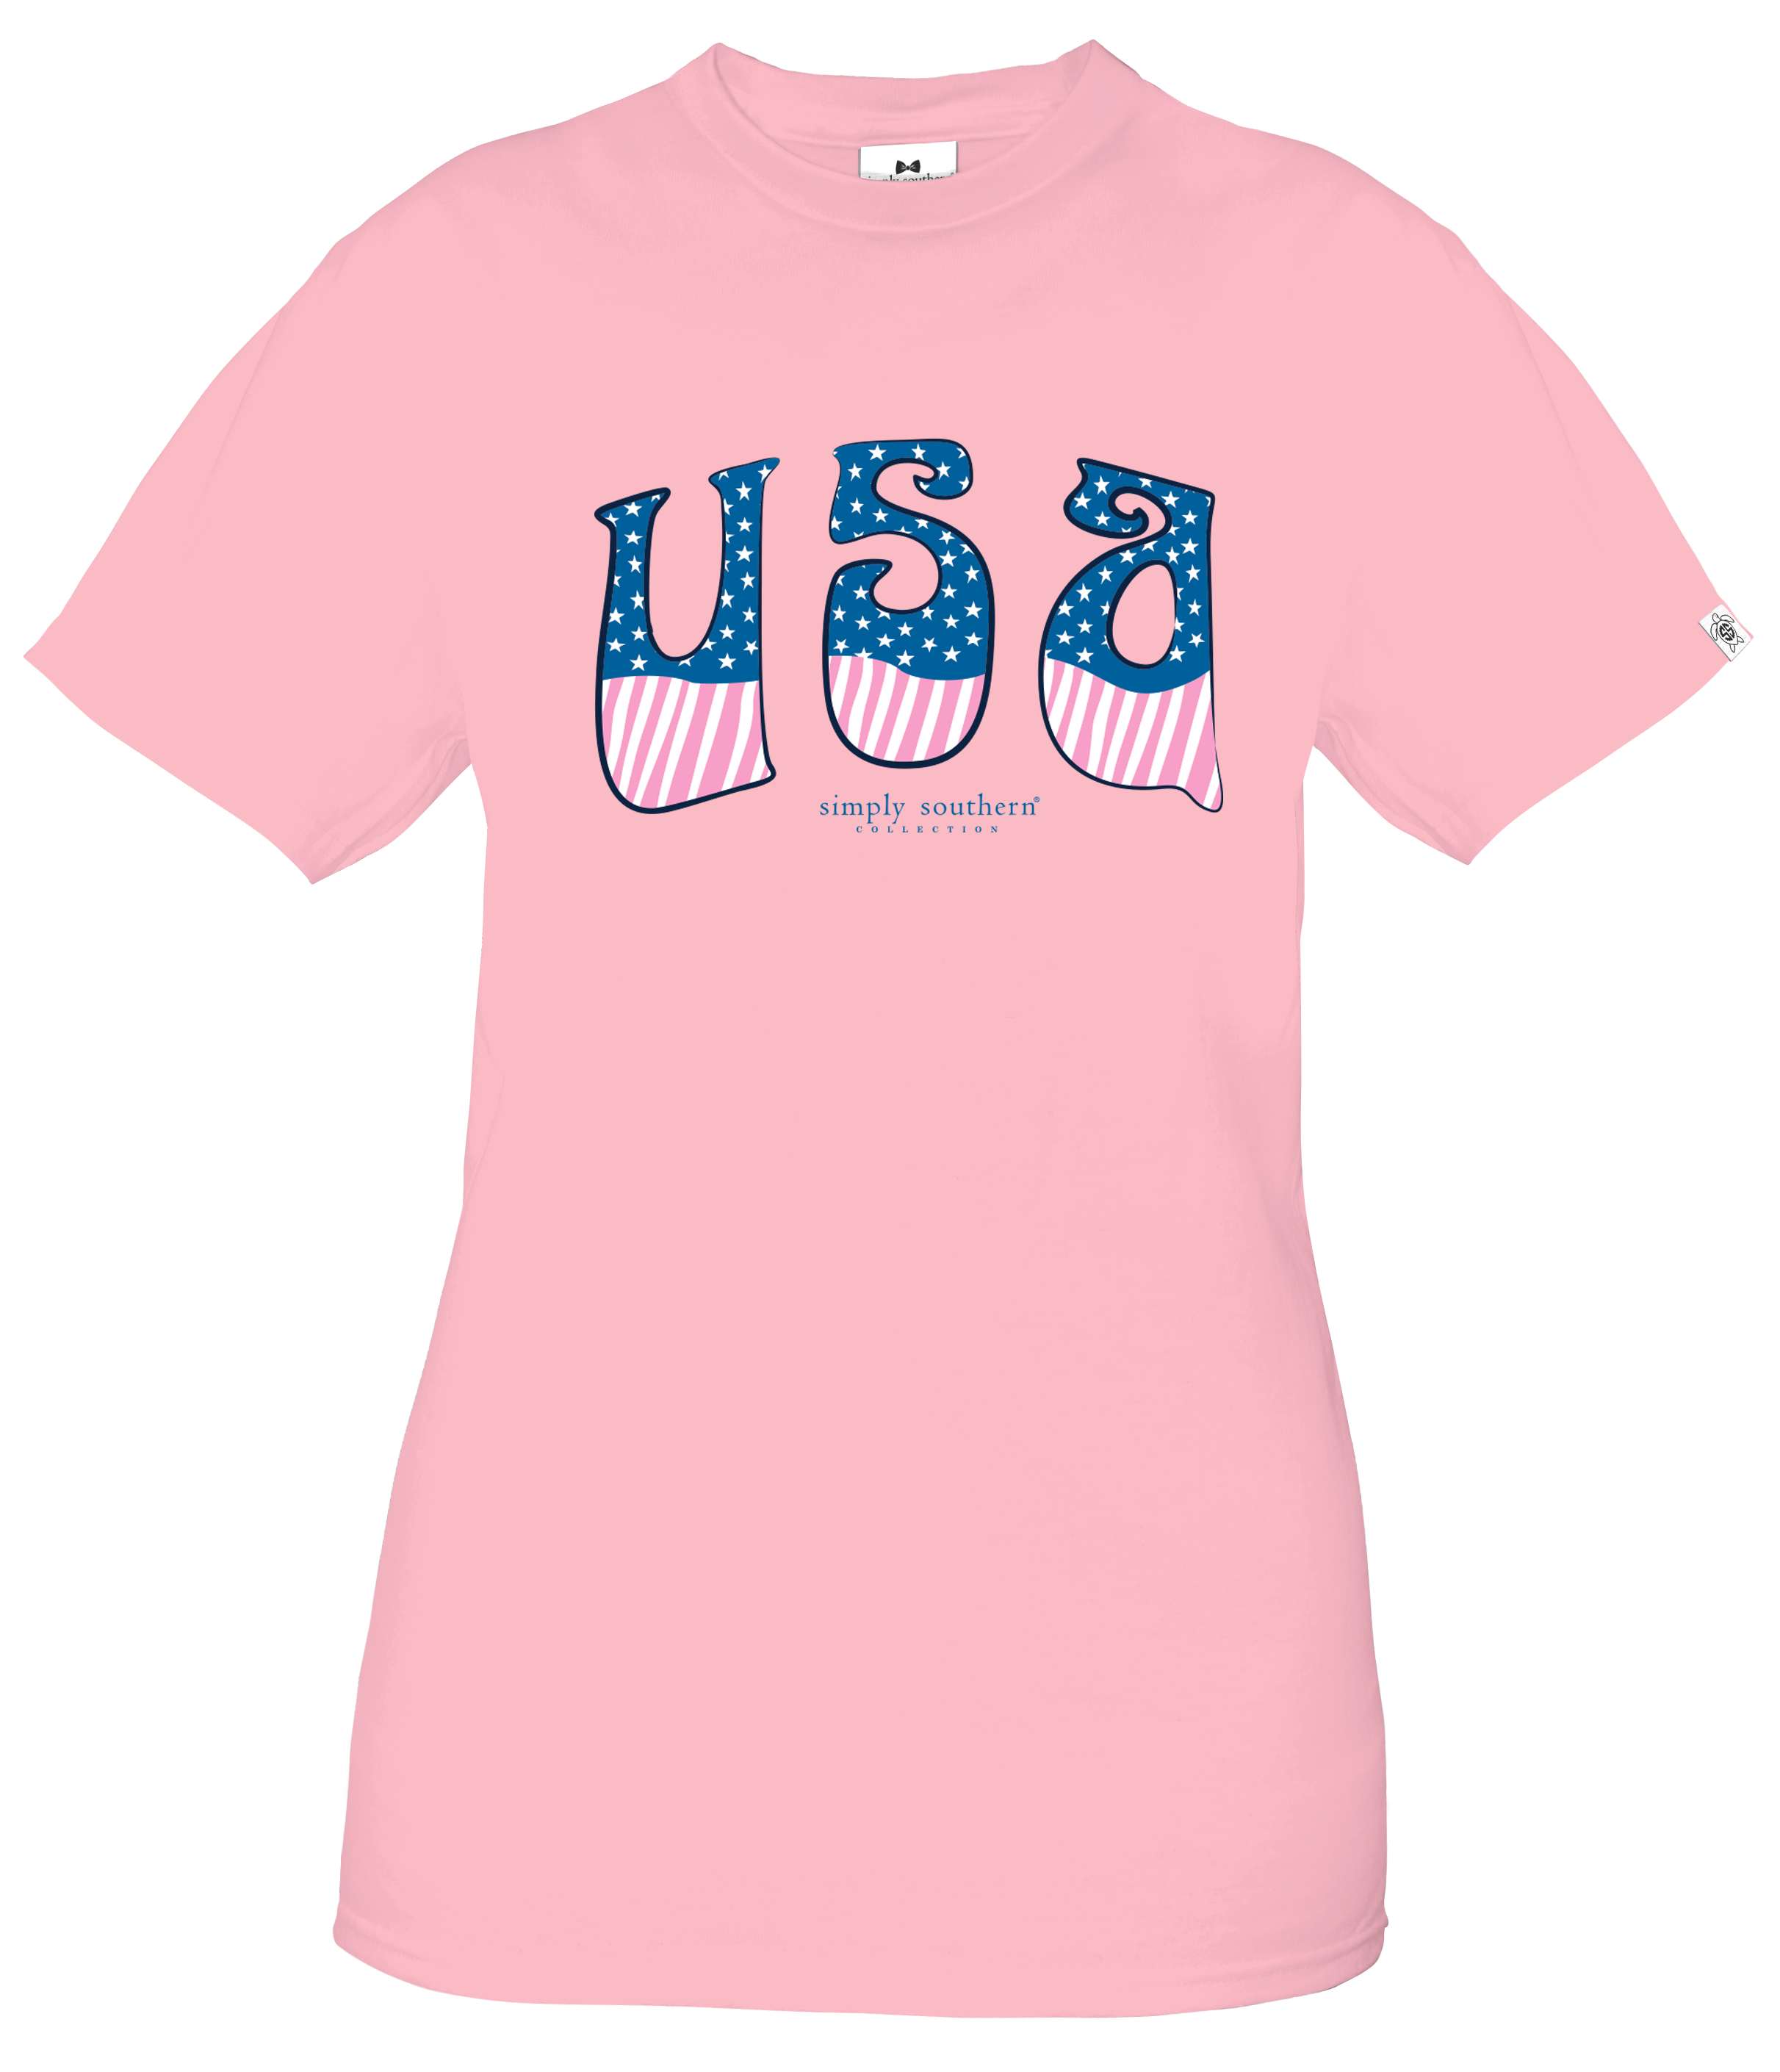 Youth 'Sweet & Classy Land of Liberty' Short Sleeve Tee by Simply Southern